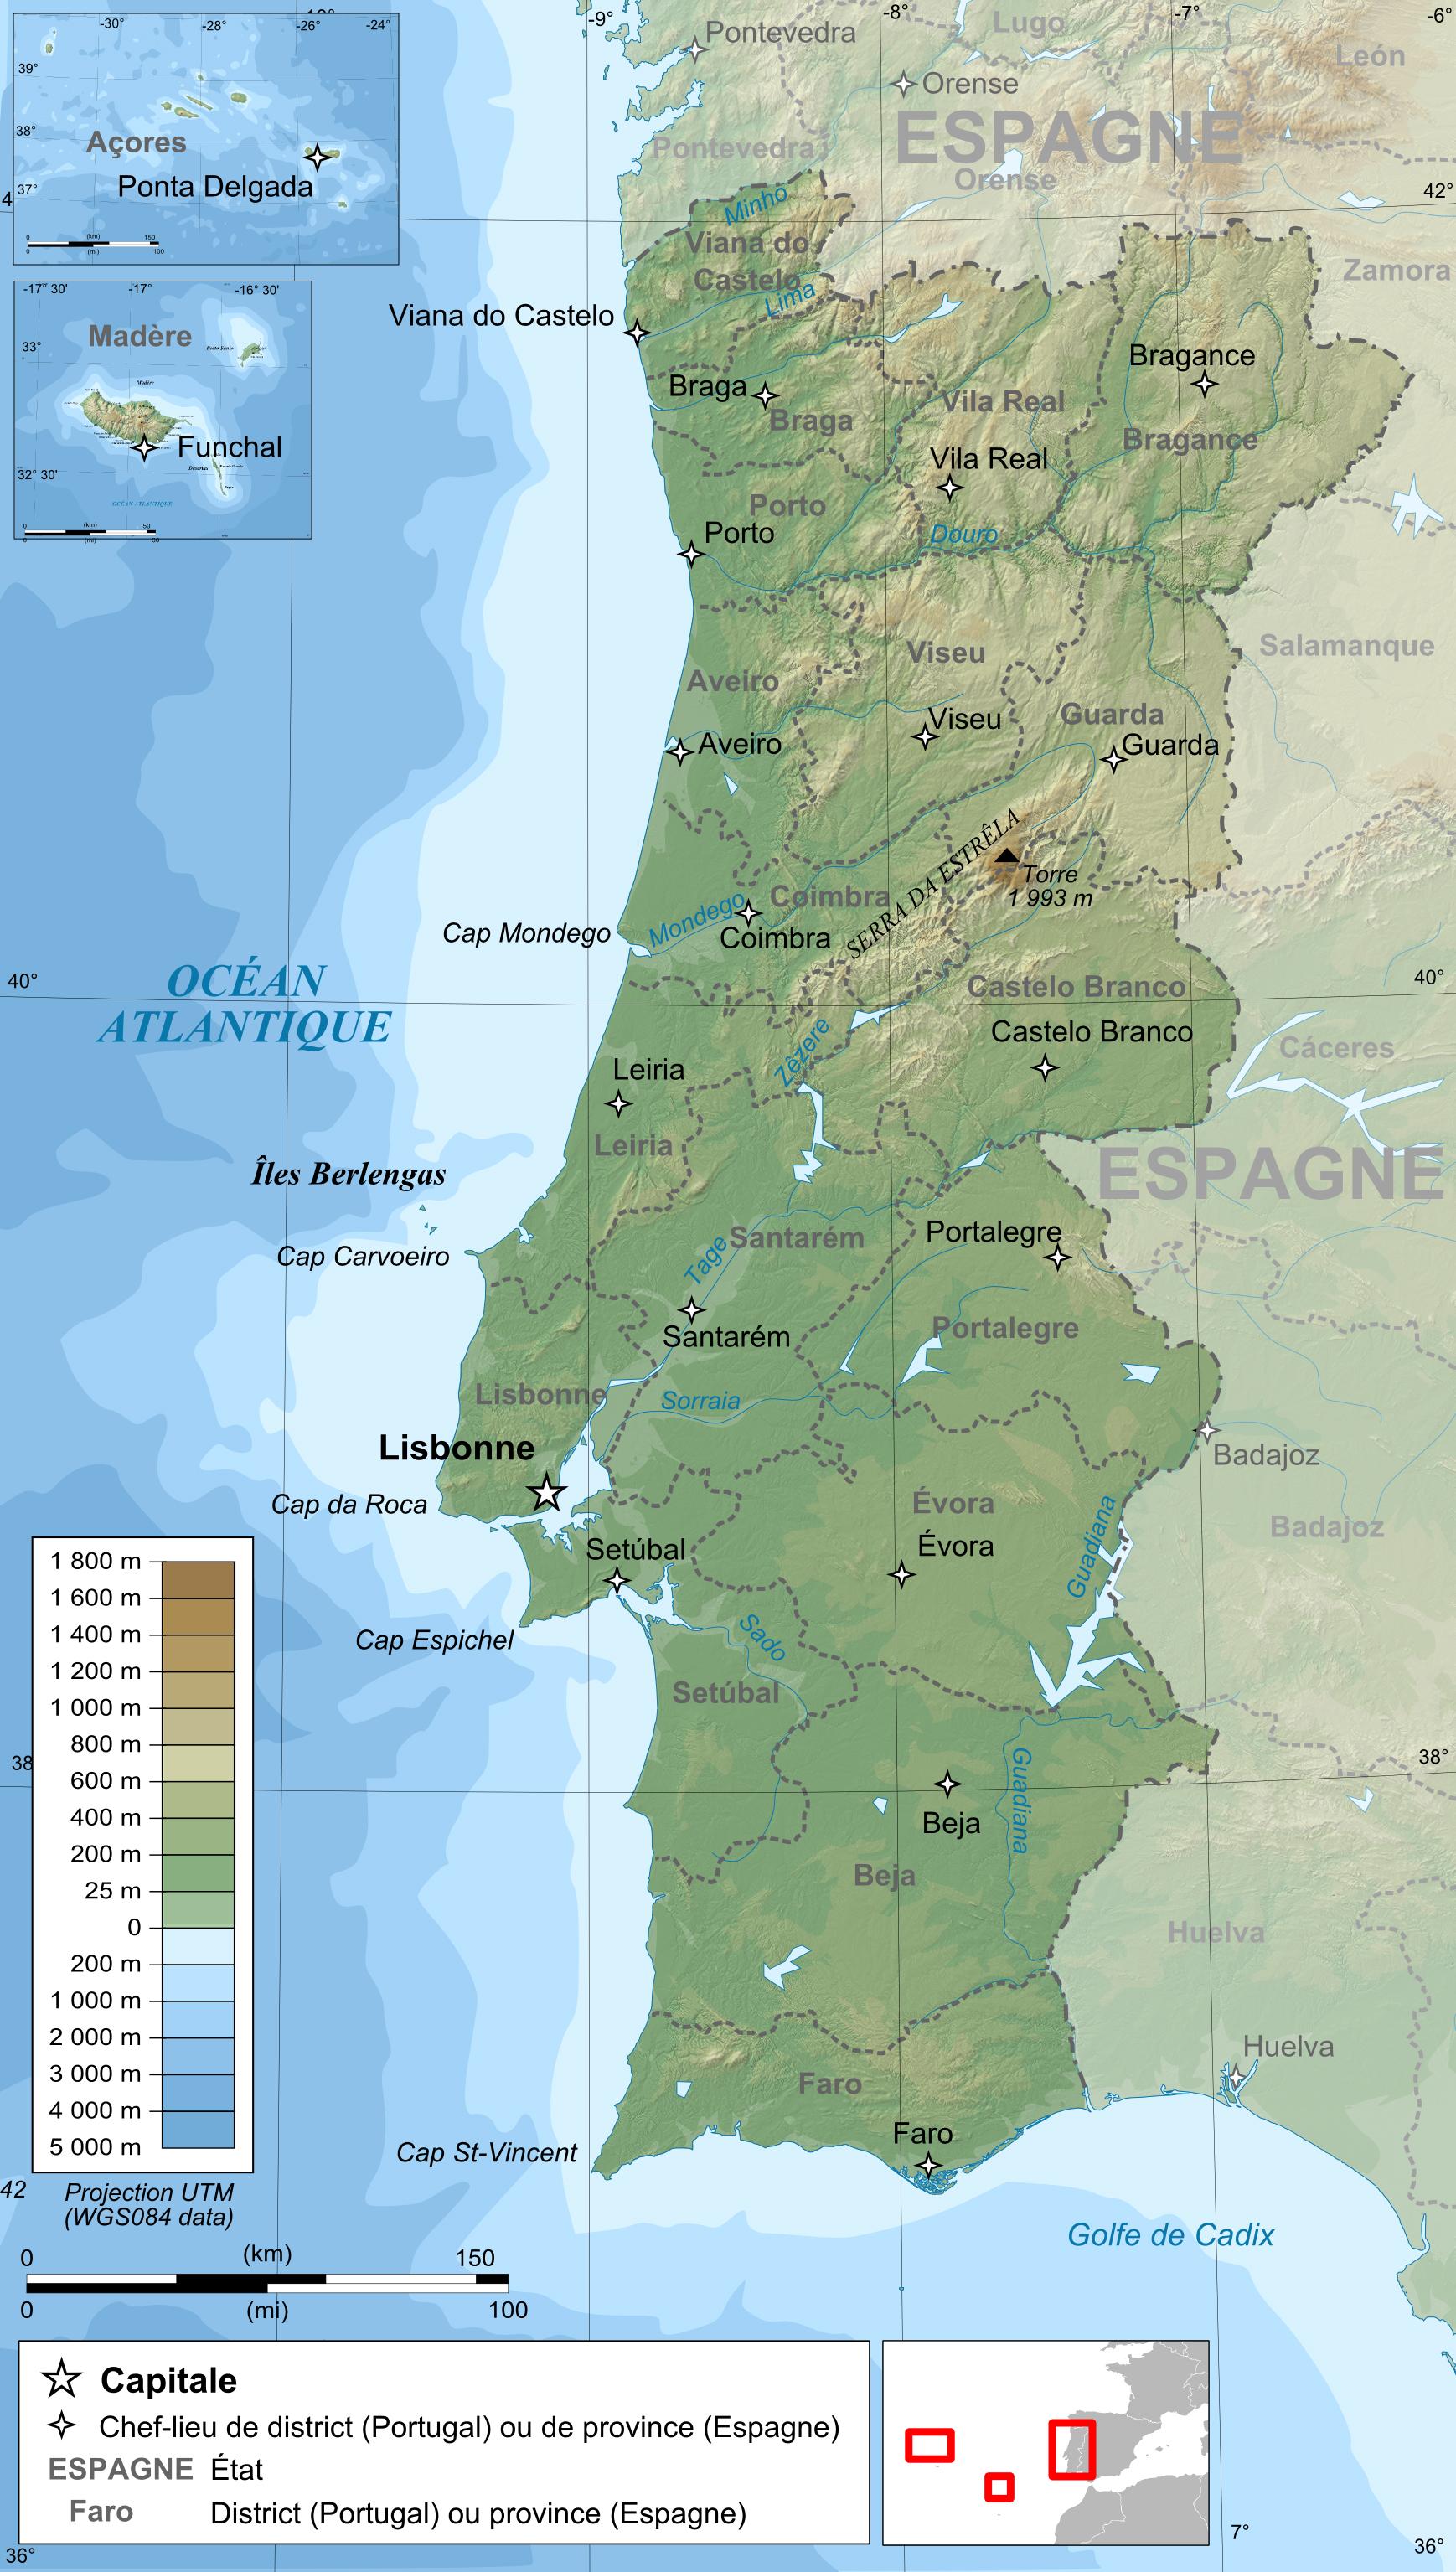 Detailed elevation map of Portugal with cities, Portugal